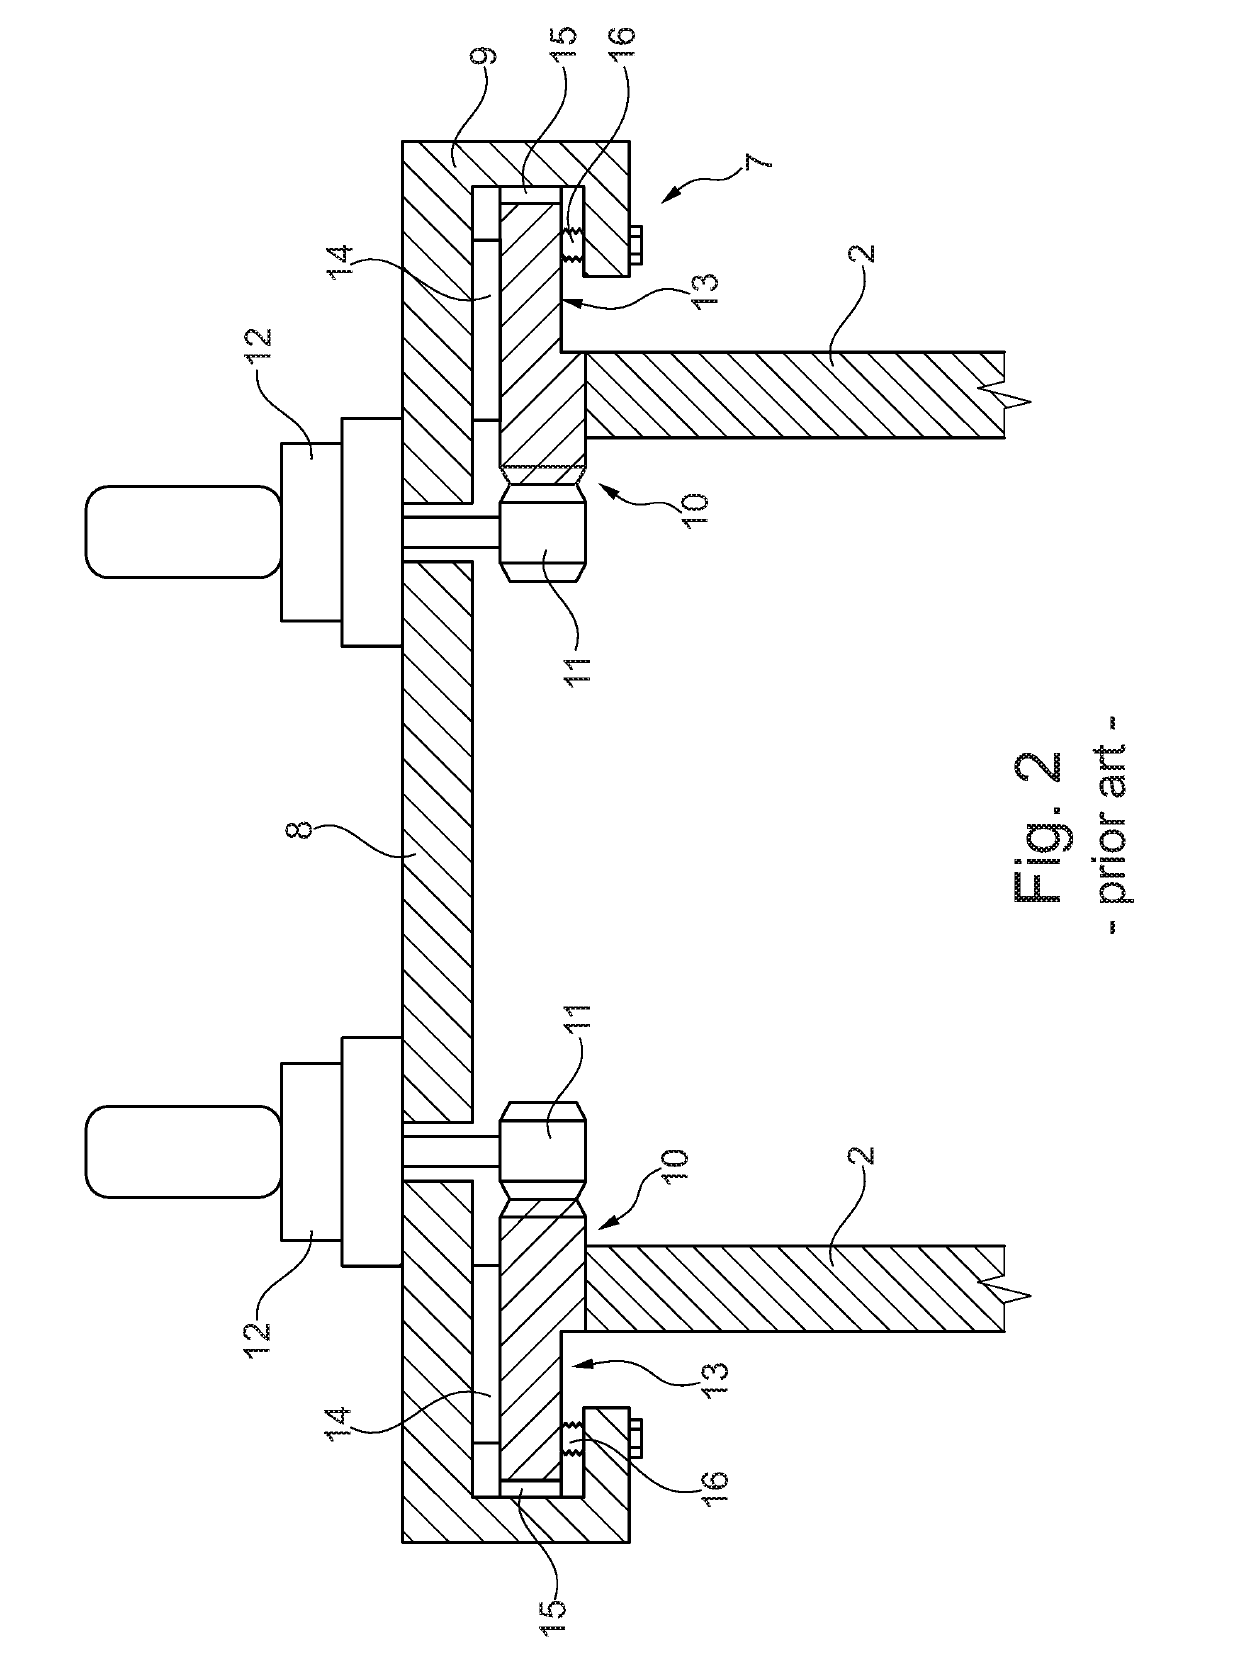 Wind Turbine Comprising a Yaw Bearing System